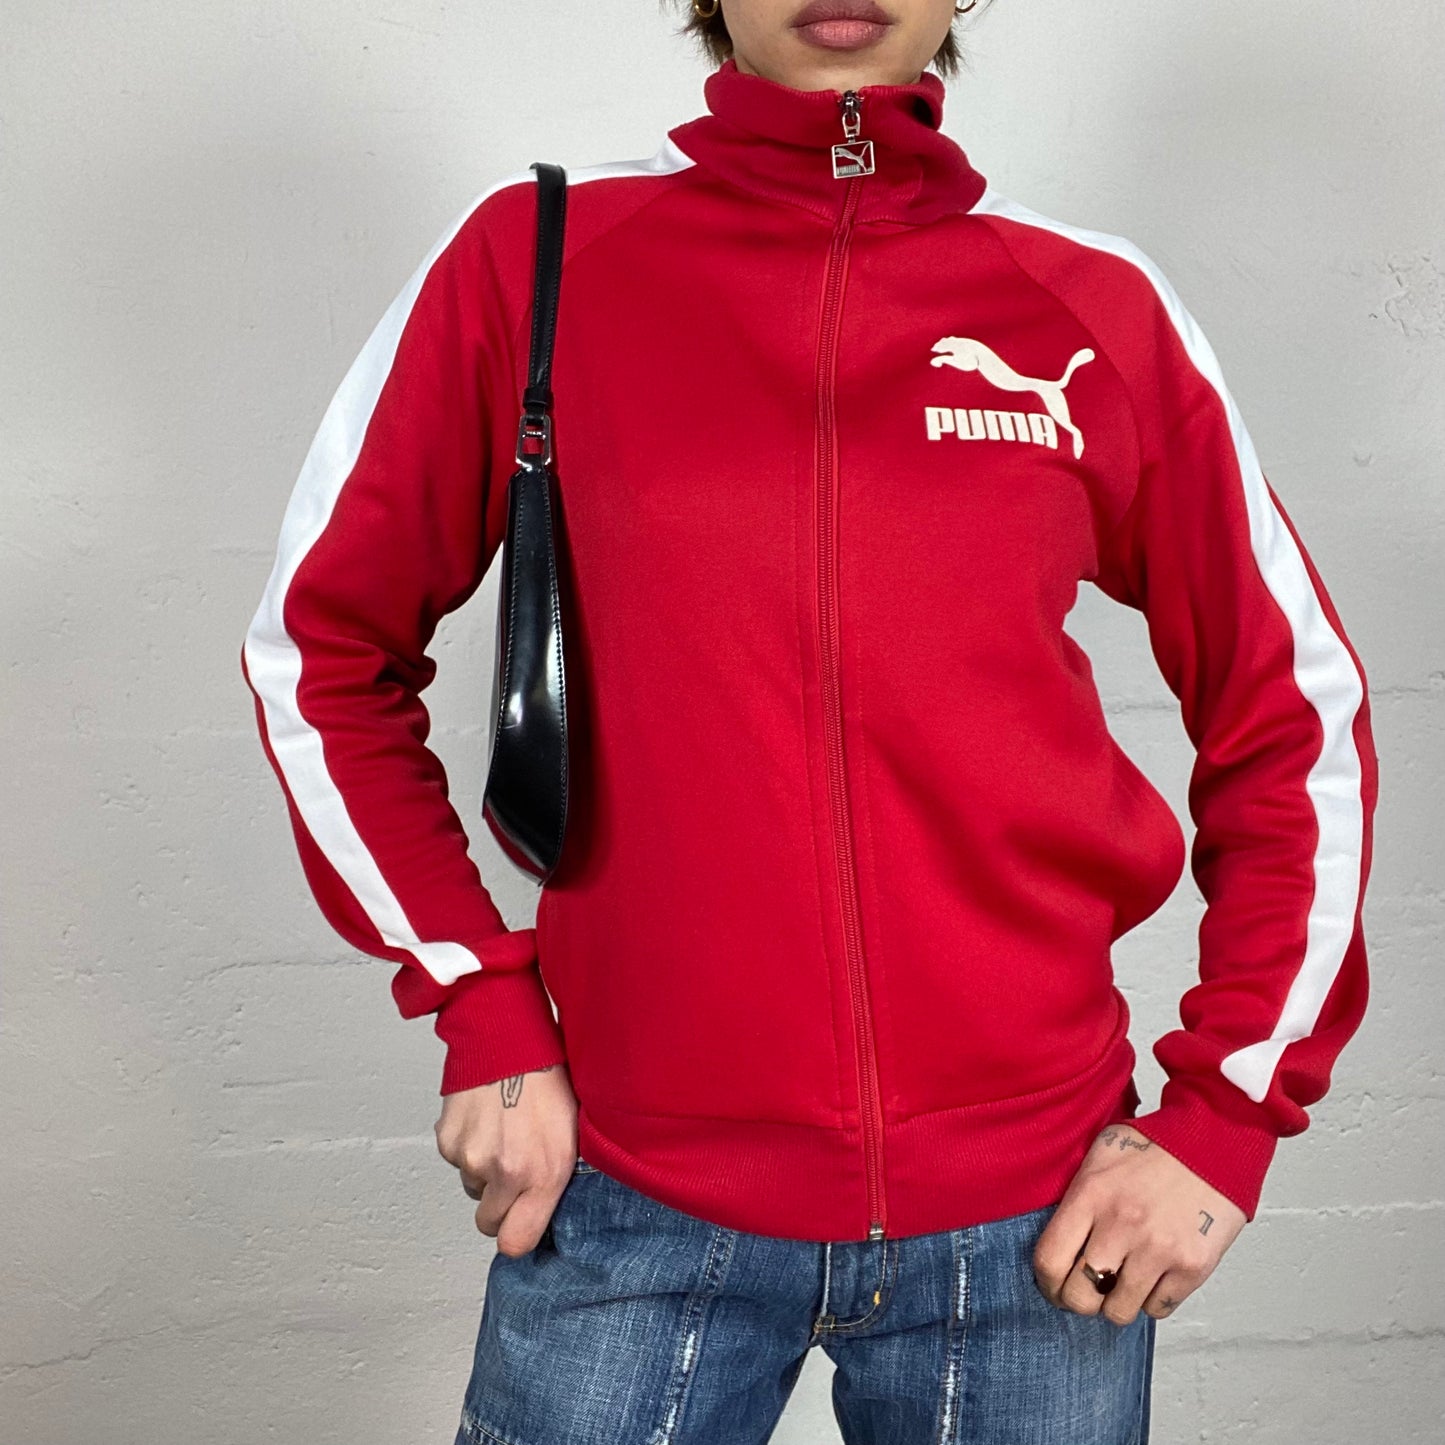 Vintage 2000's Puma Sporty Red Zip Up Oversized Sweater with White Brand Print (M)